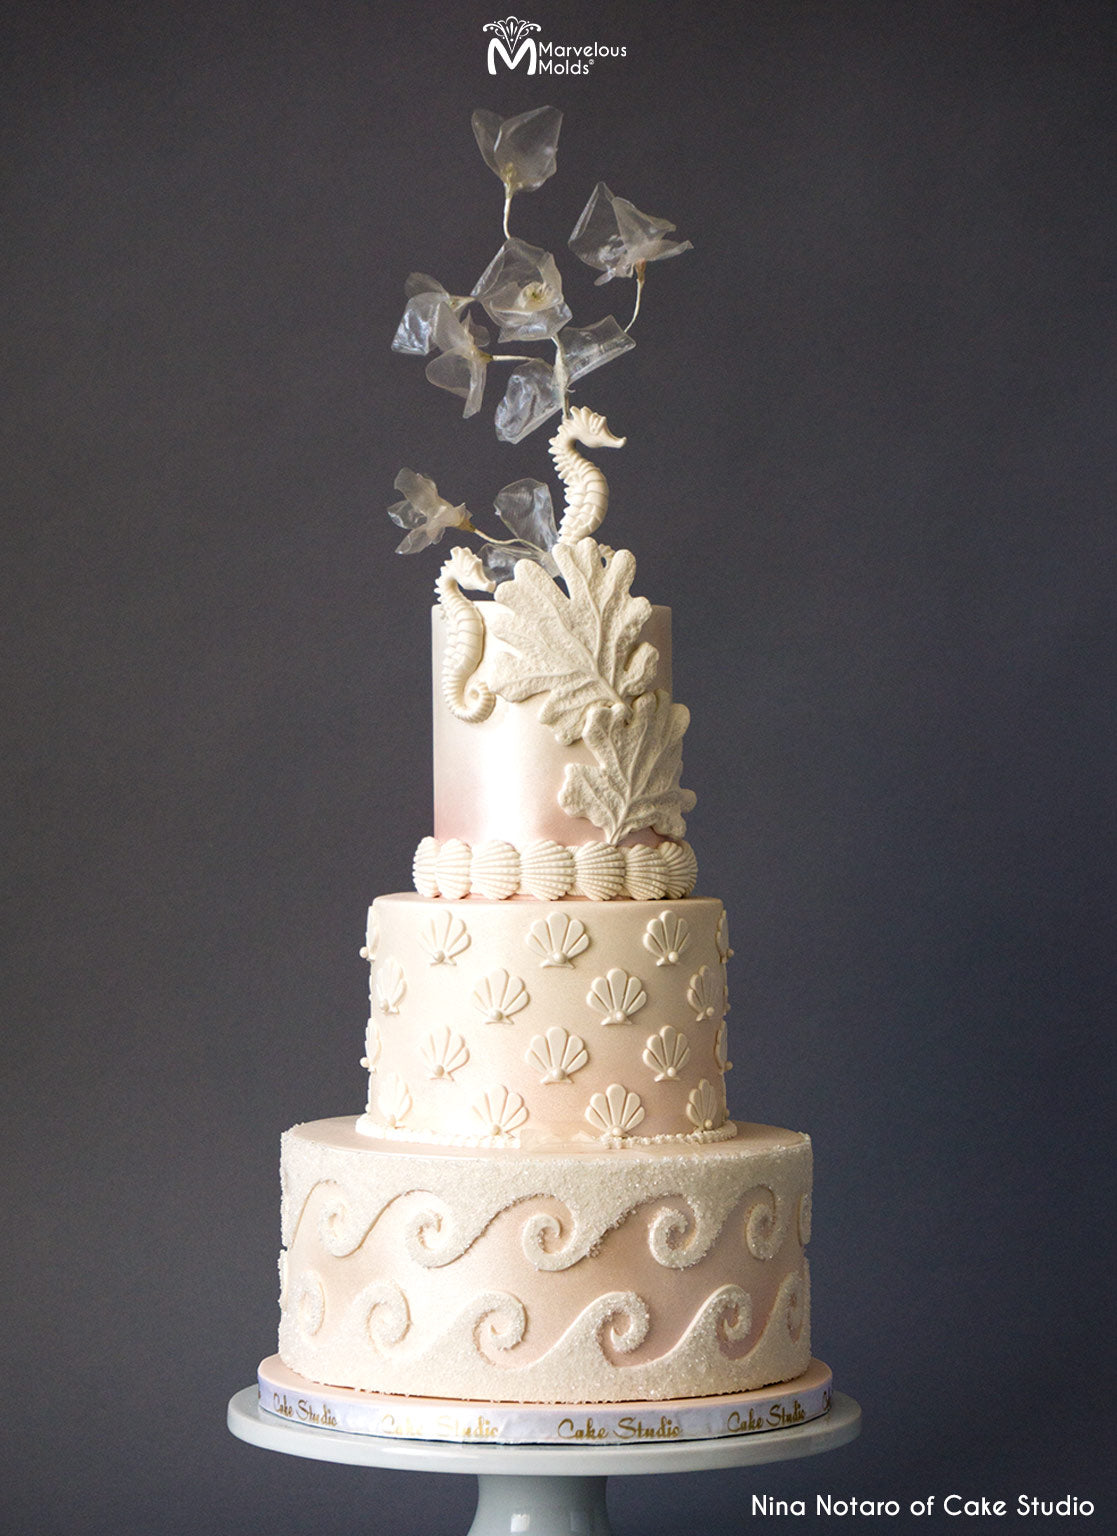 Seashell Off-White Wedding Cake Decorated Using the Marvelous Molds Seashell Silicone Border Mold by Marvelous Molds